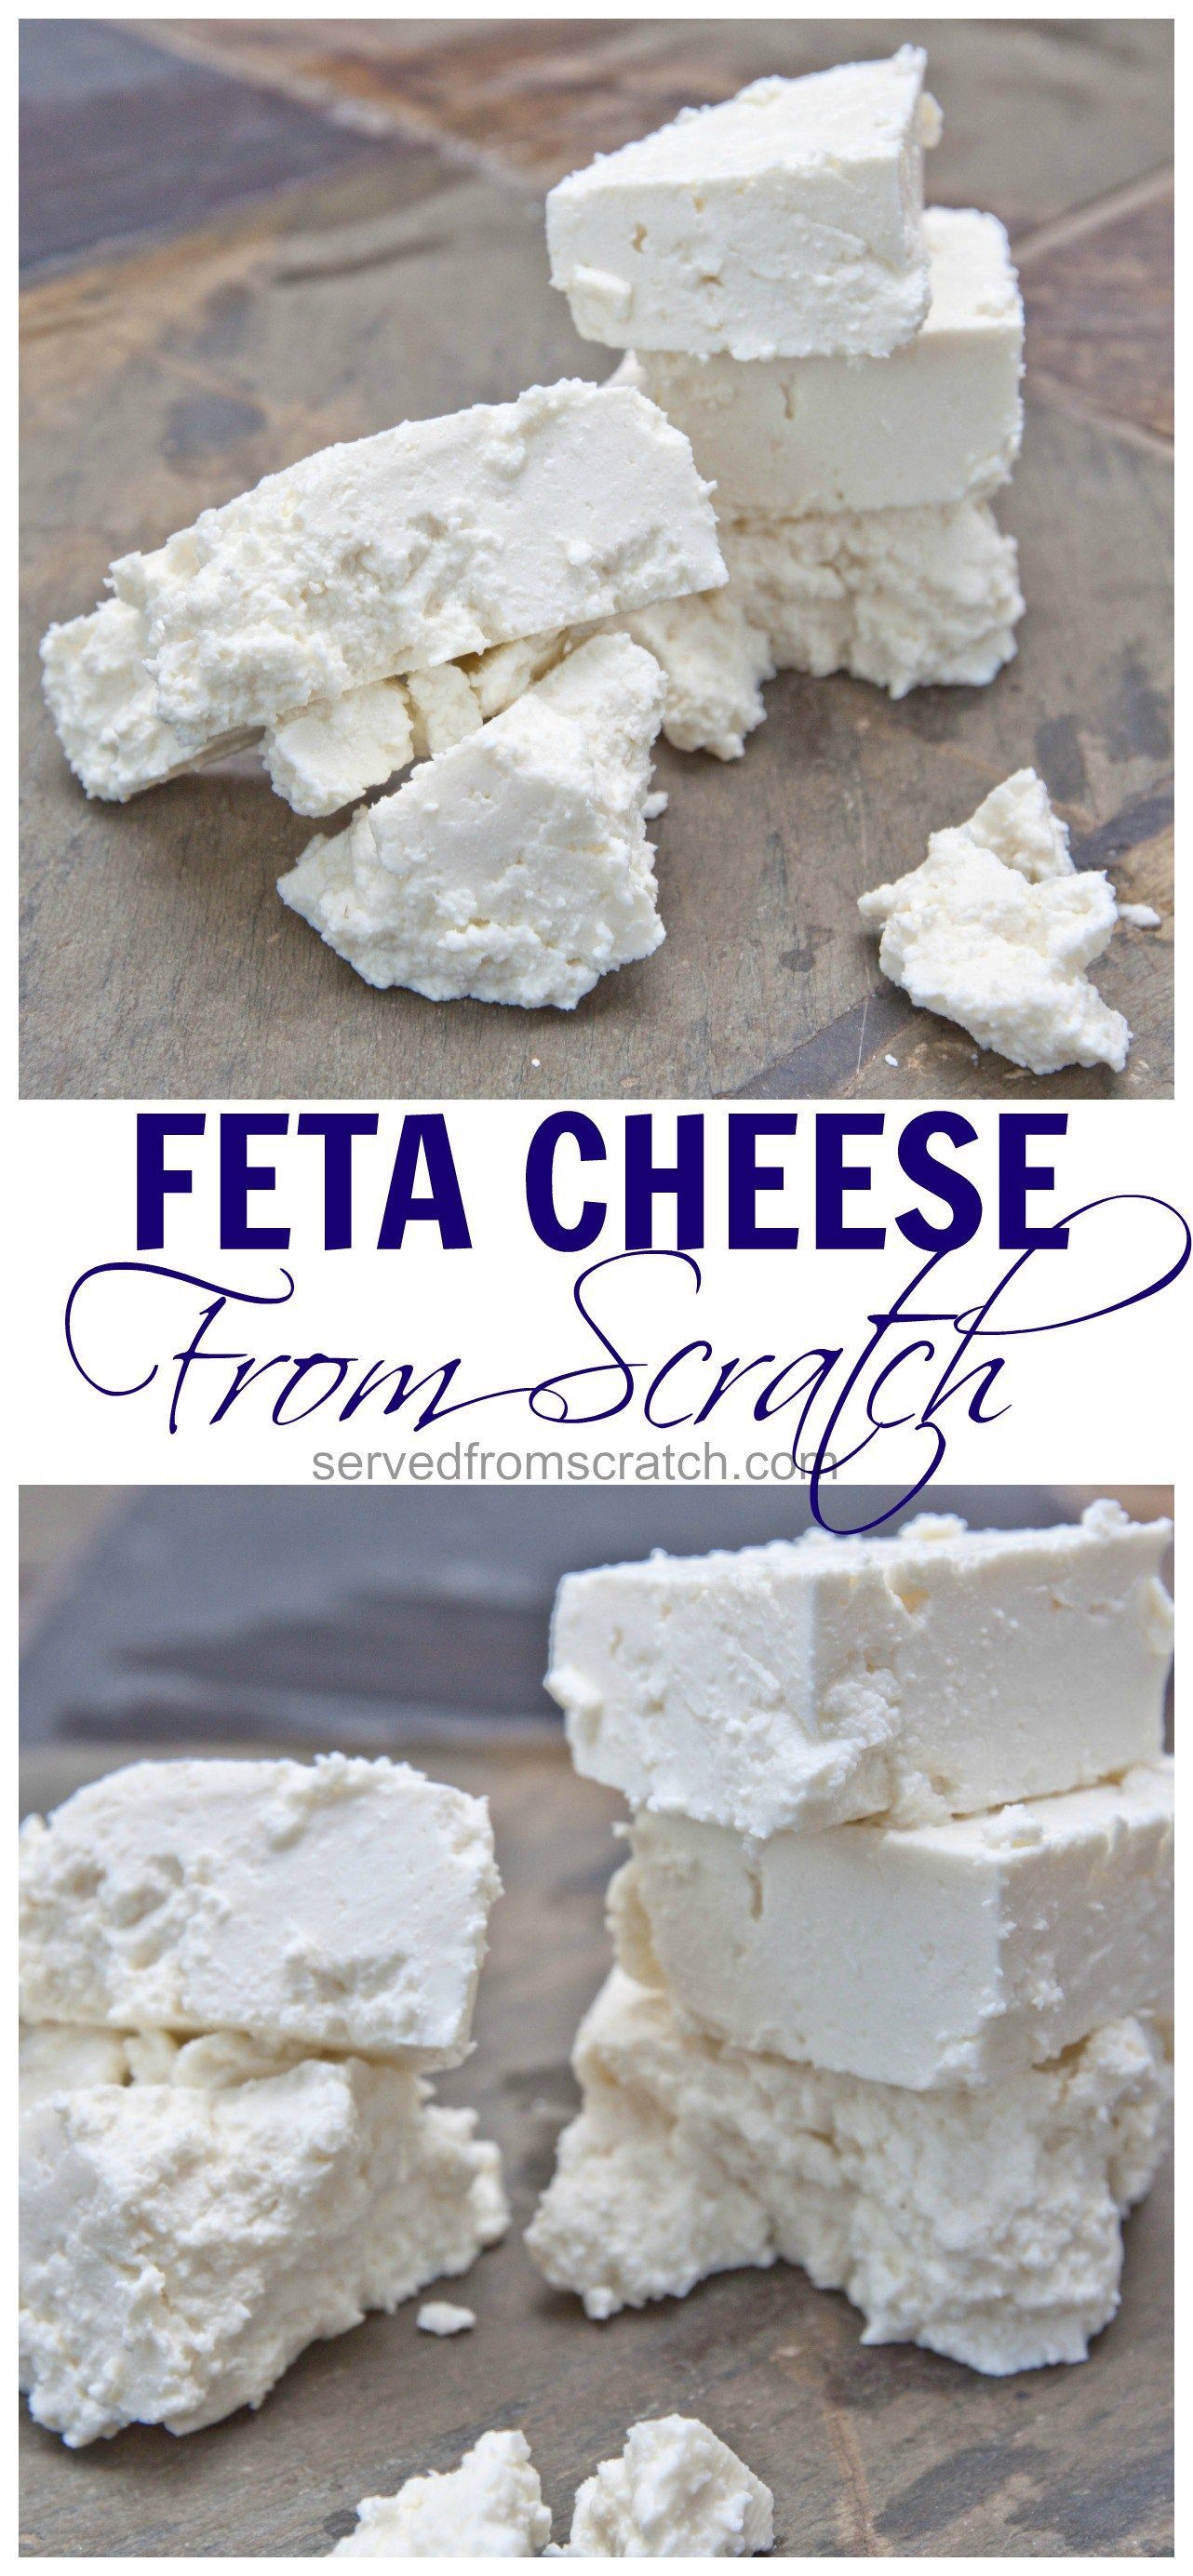 Did you know you can make your own Feta Cheese From Scratch?! Its a labor of love, but so incredibly worth it!